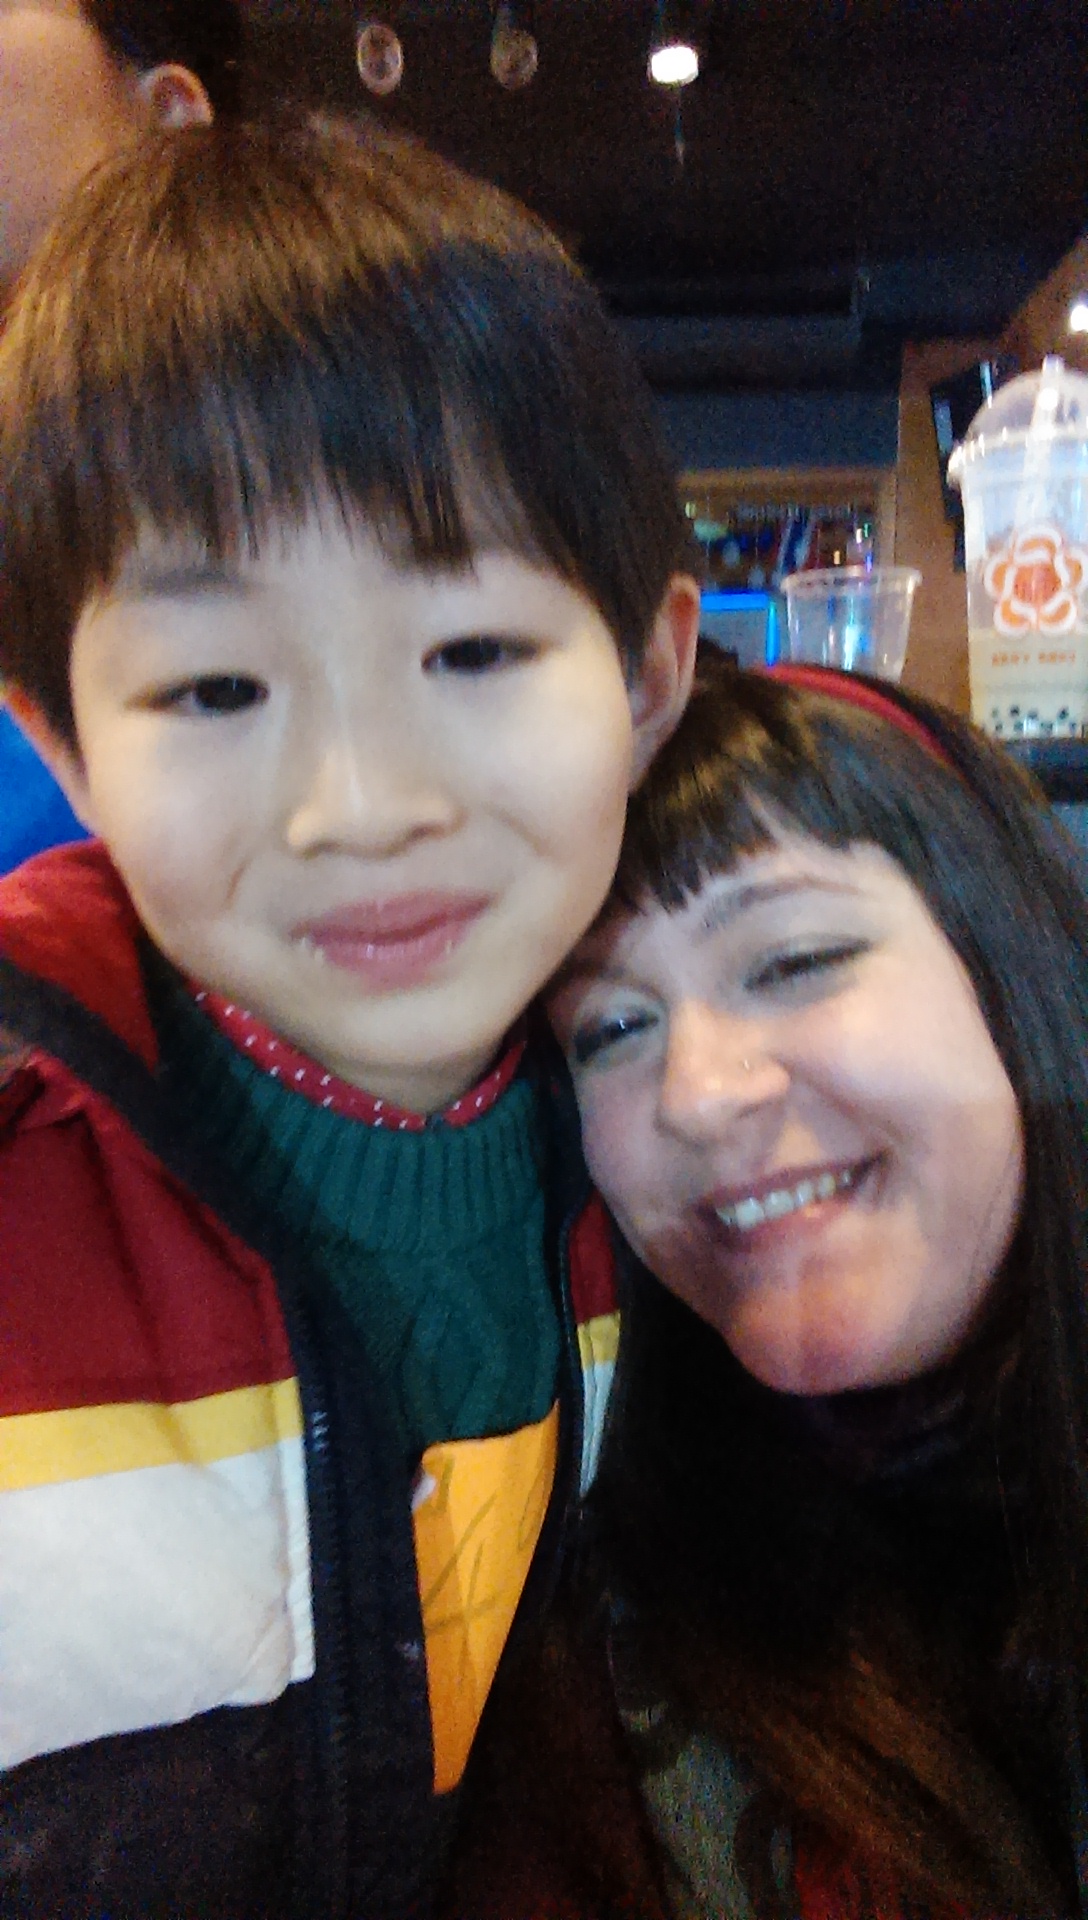 Steven and I.  This kid is so sweet...